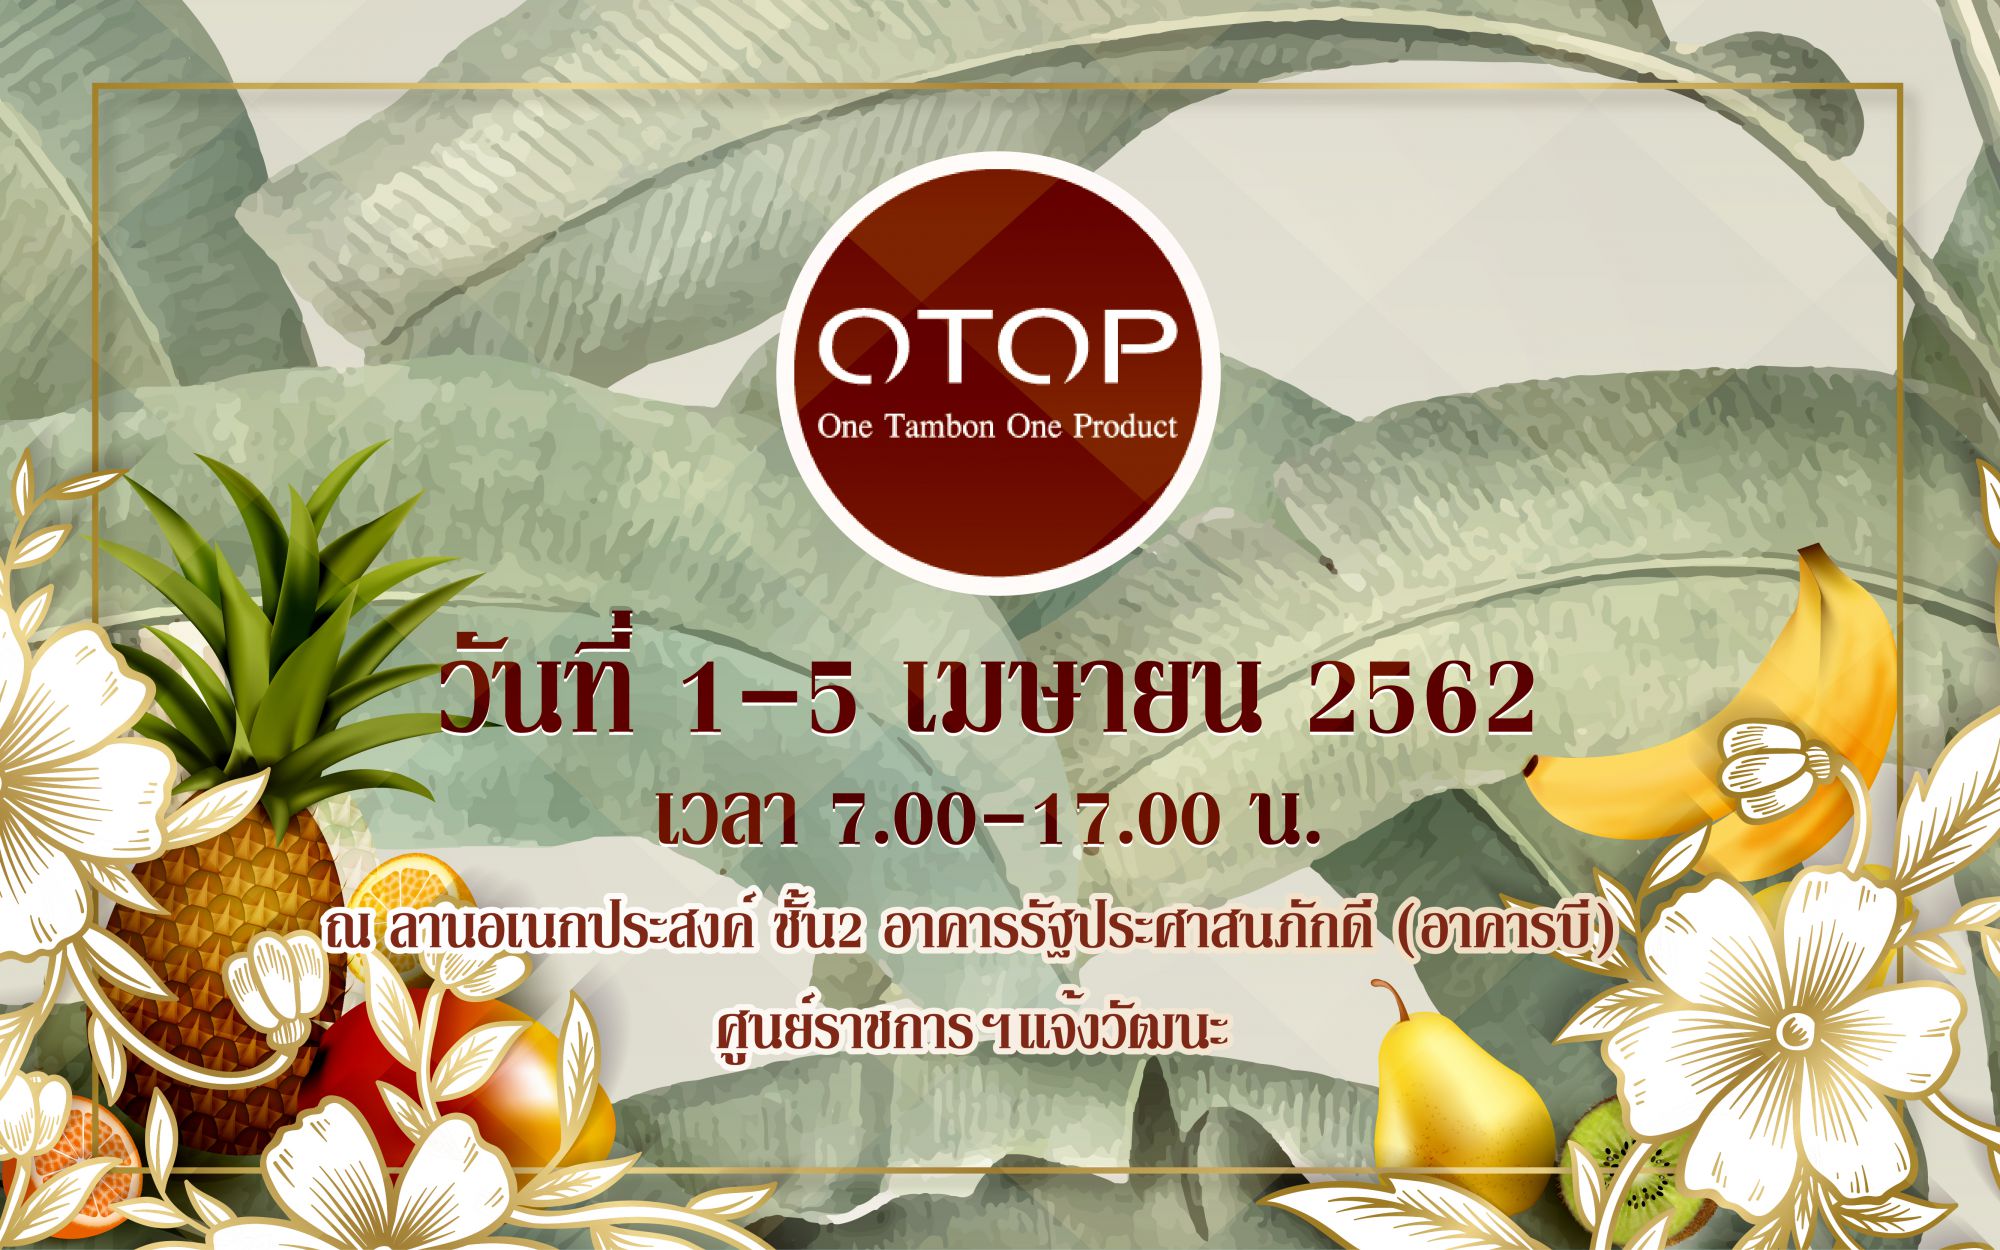 OTOP One Tambon One Product